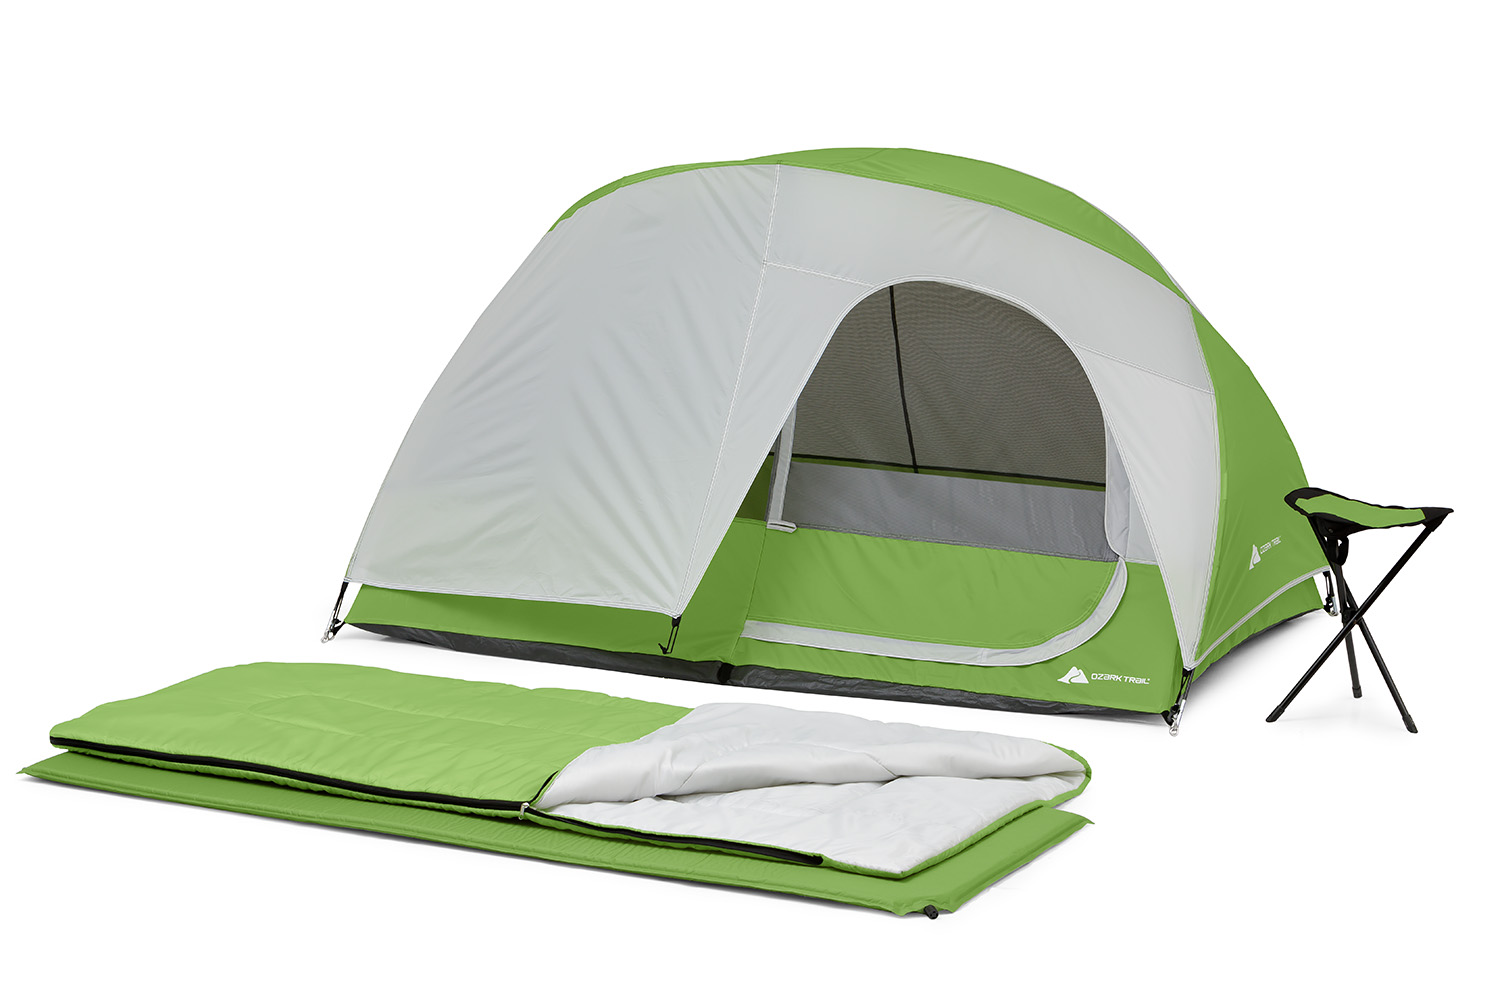 Ozark Trail 4 Piece Weekender Backpacking Camp Combo (Includes tent, sleeping bag, camp pad, stool) - image 1 of 13